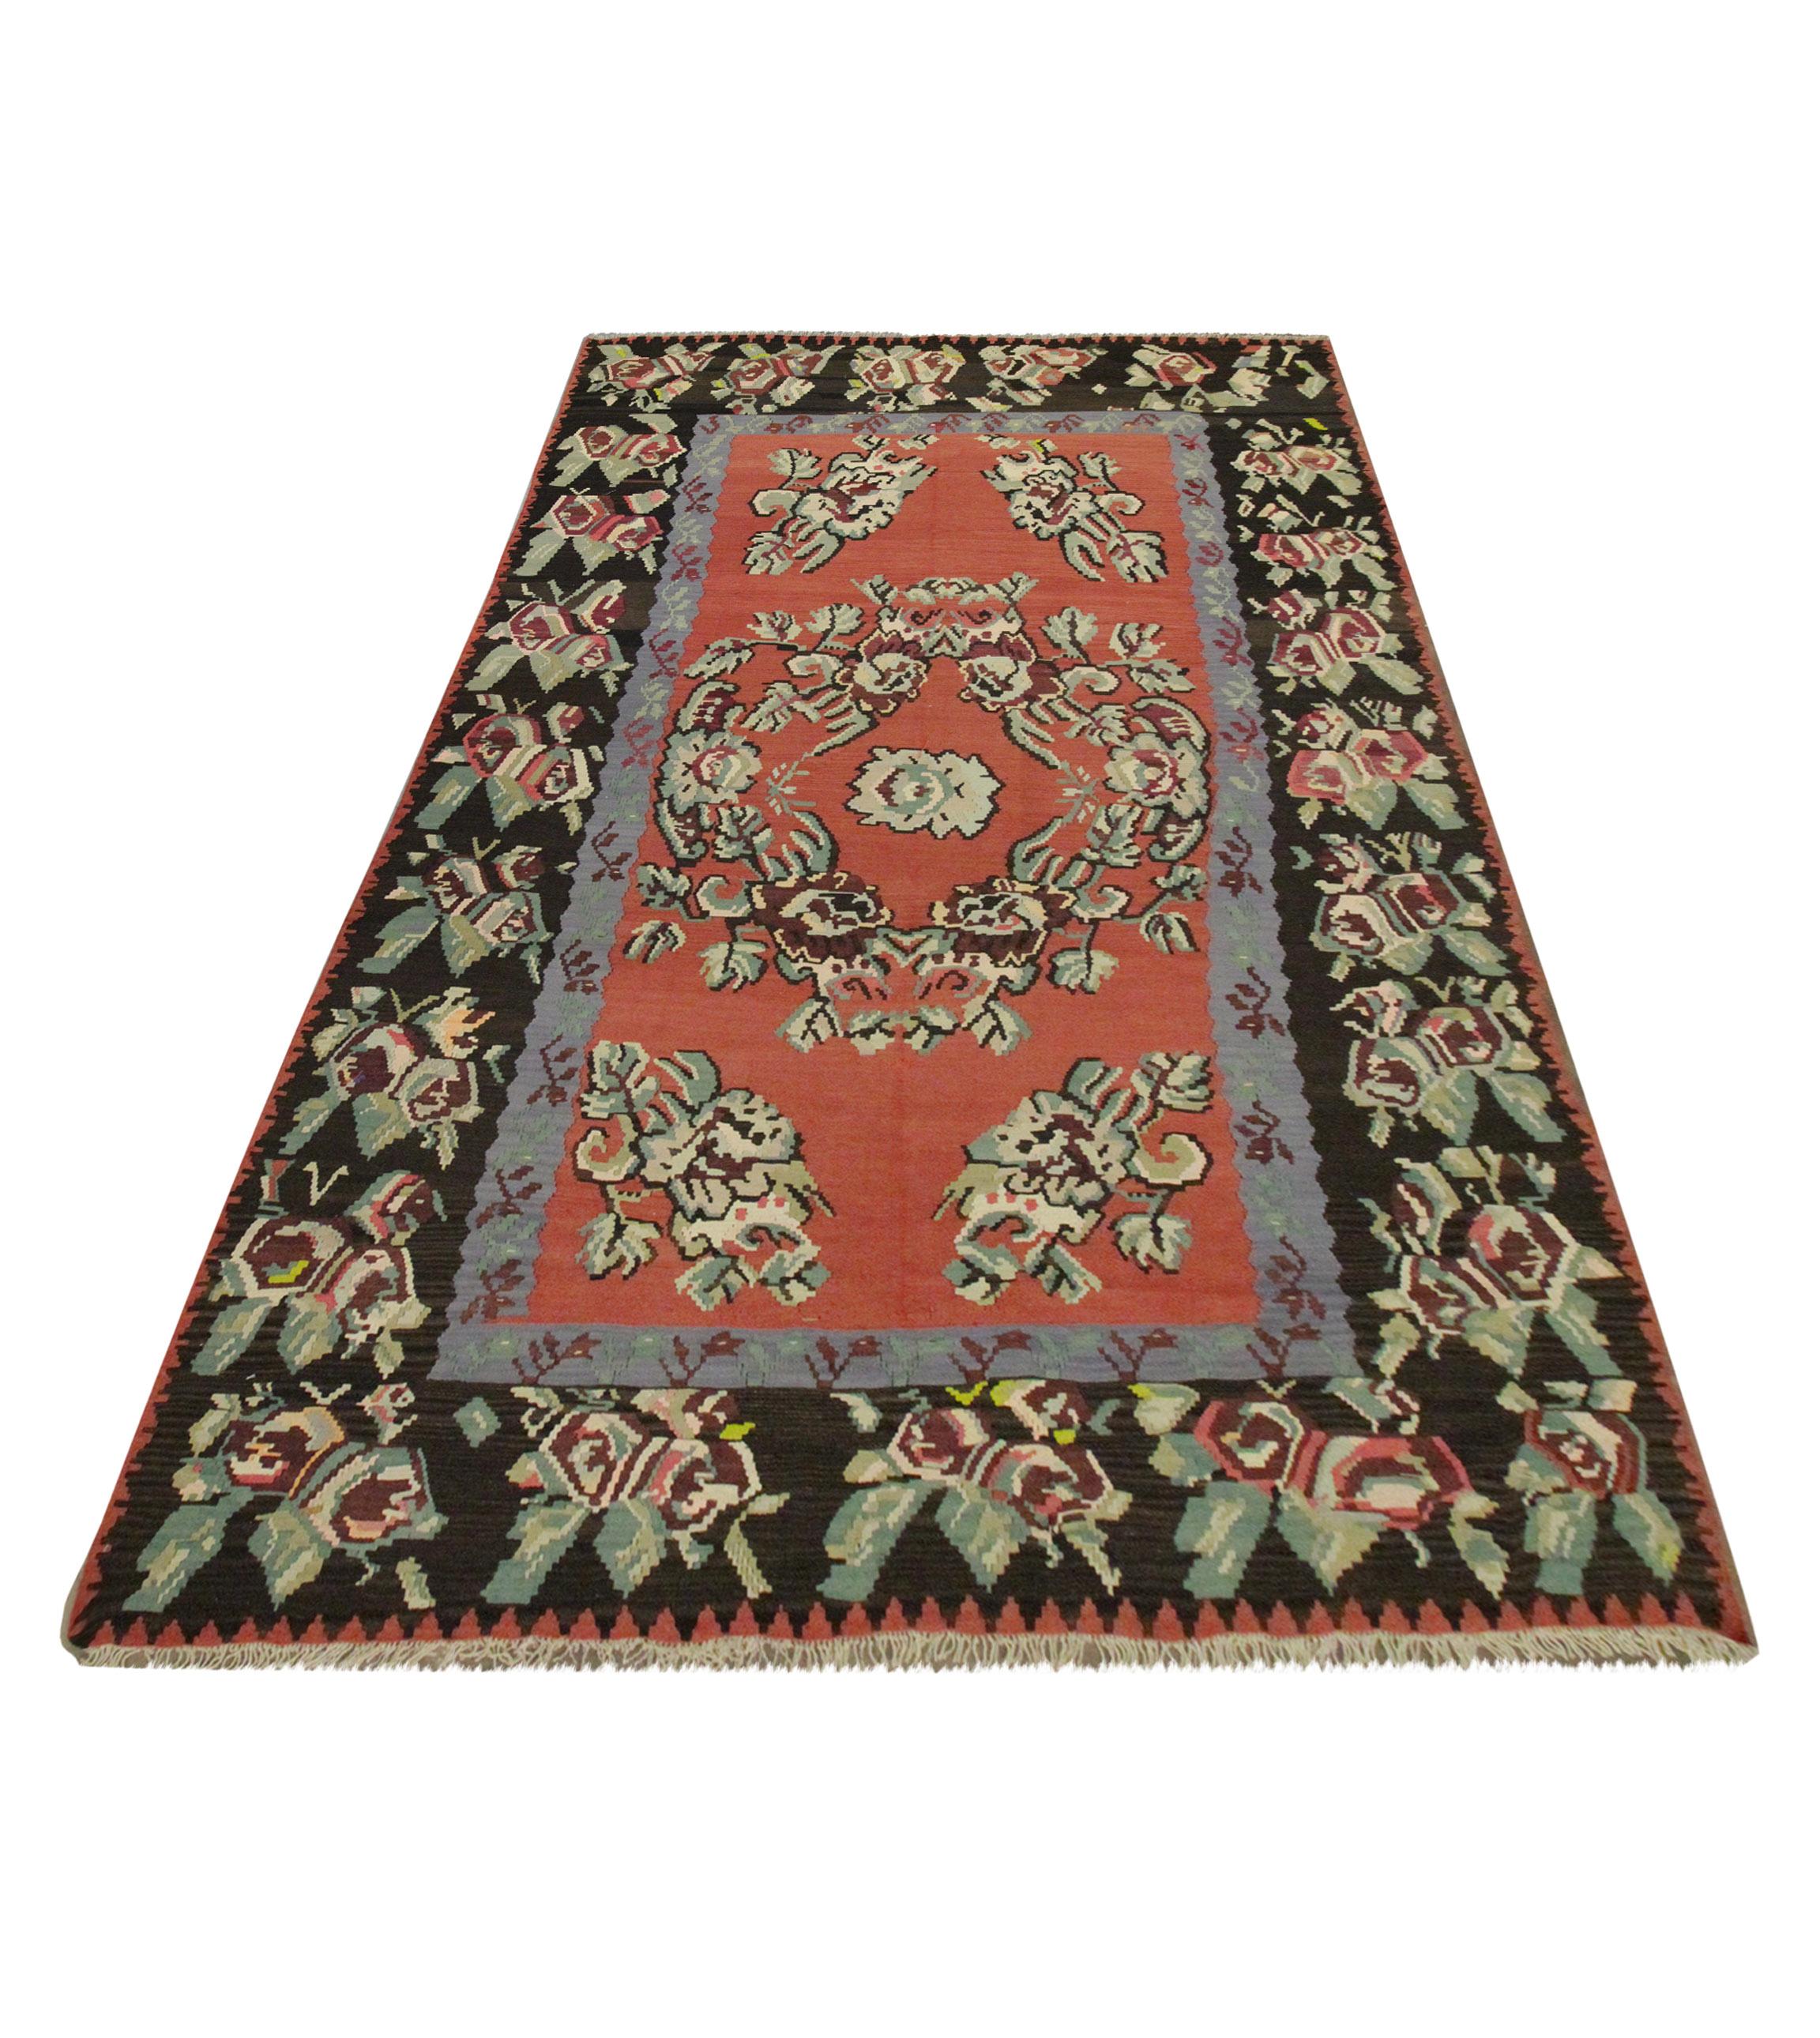 This small wool rug is a handmade Kilim woven in the early 20th century. This bold floral rug is has been woven with a rich red-rust field with asymmetrical floral design woven in green, brown and red accents. This is then framed by a tich border